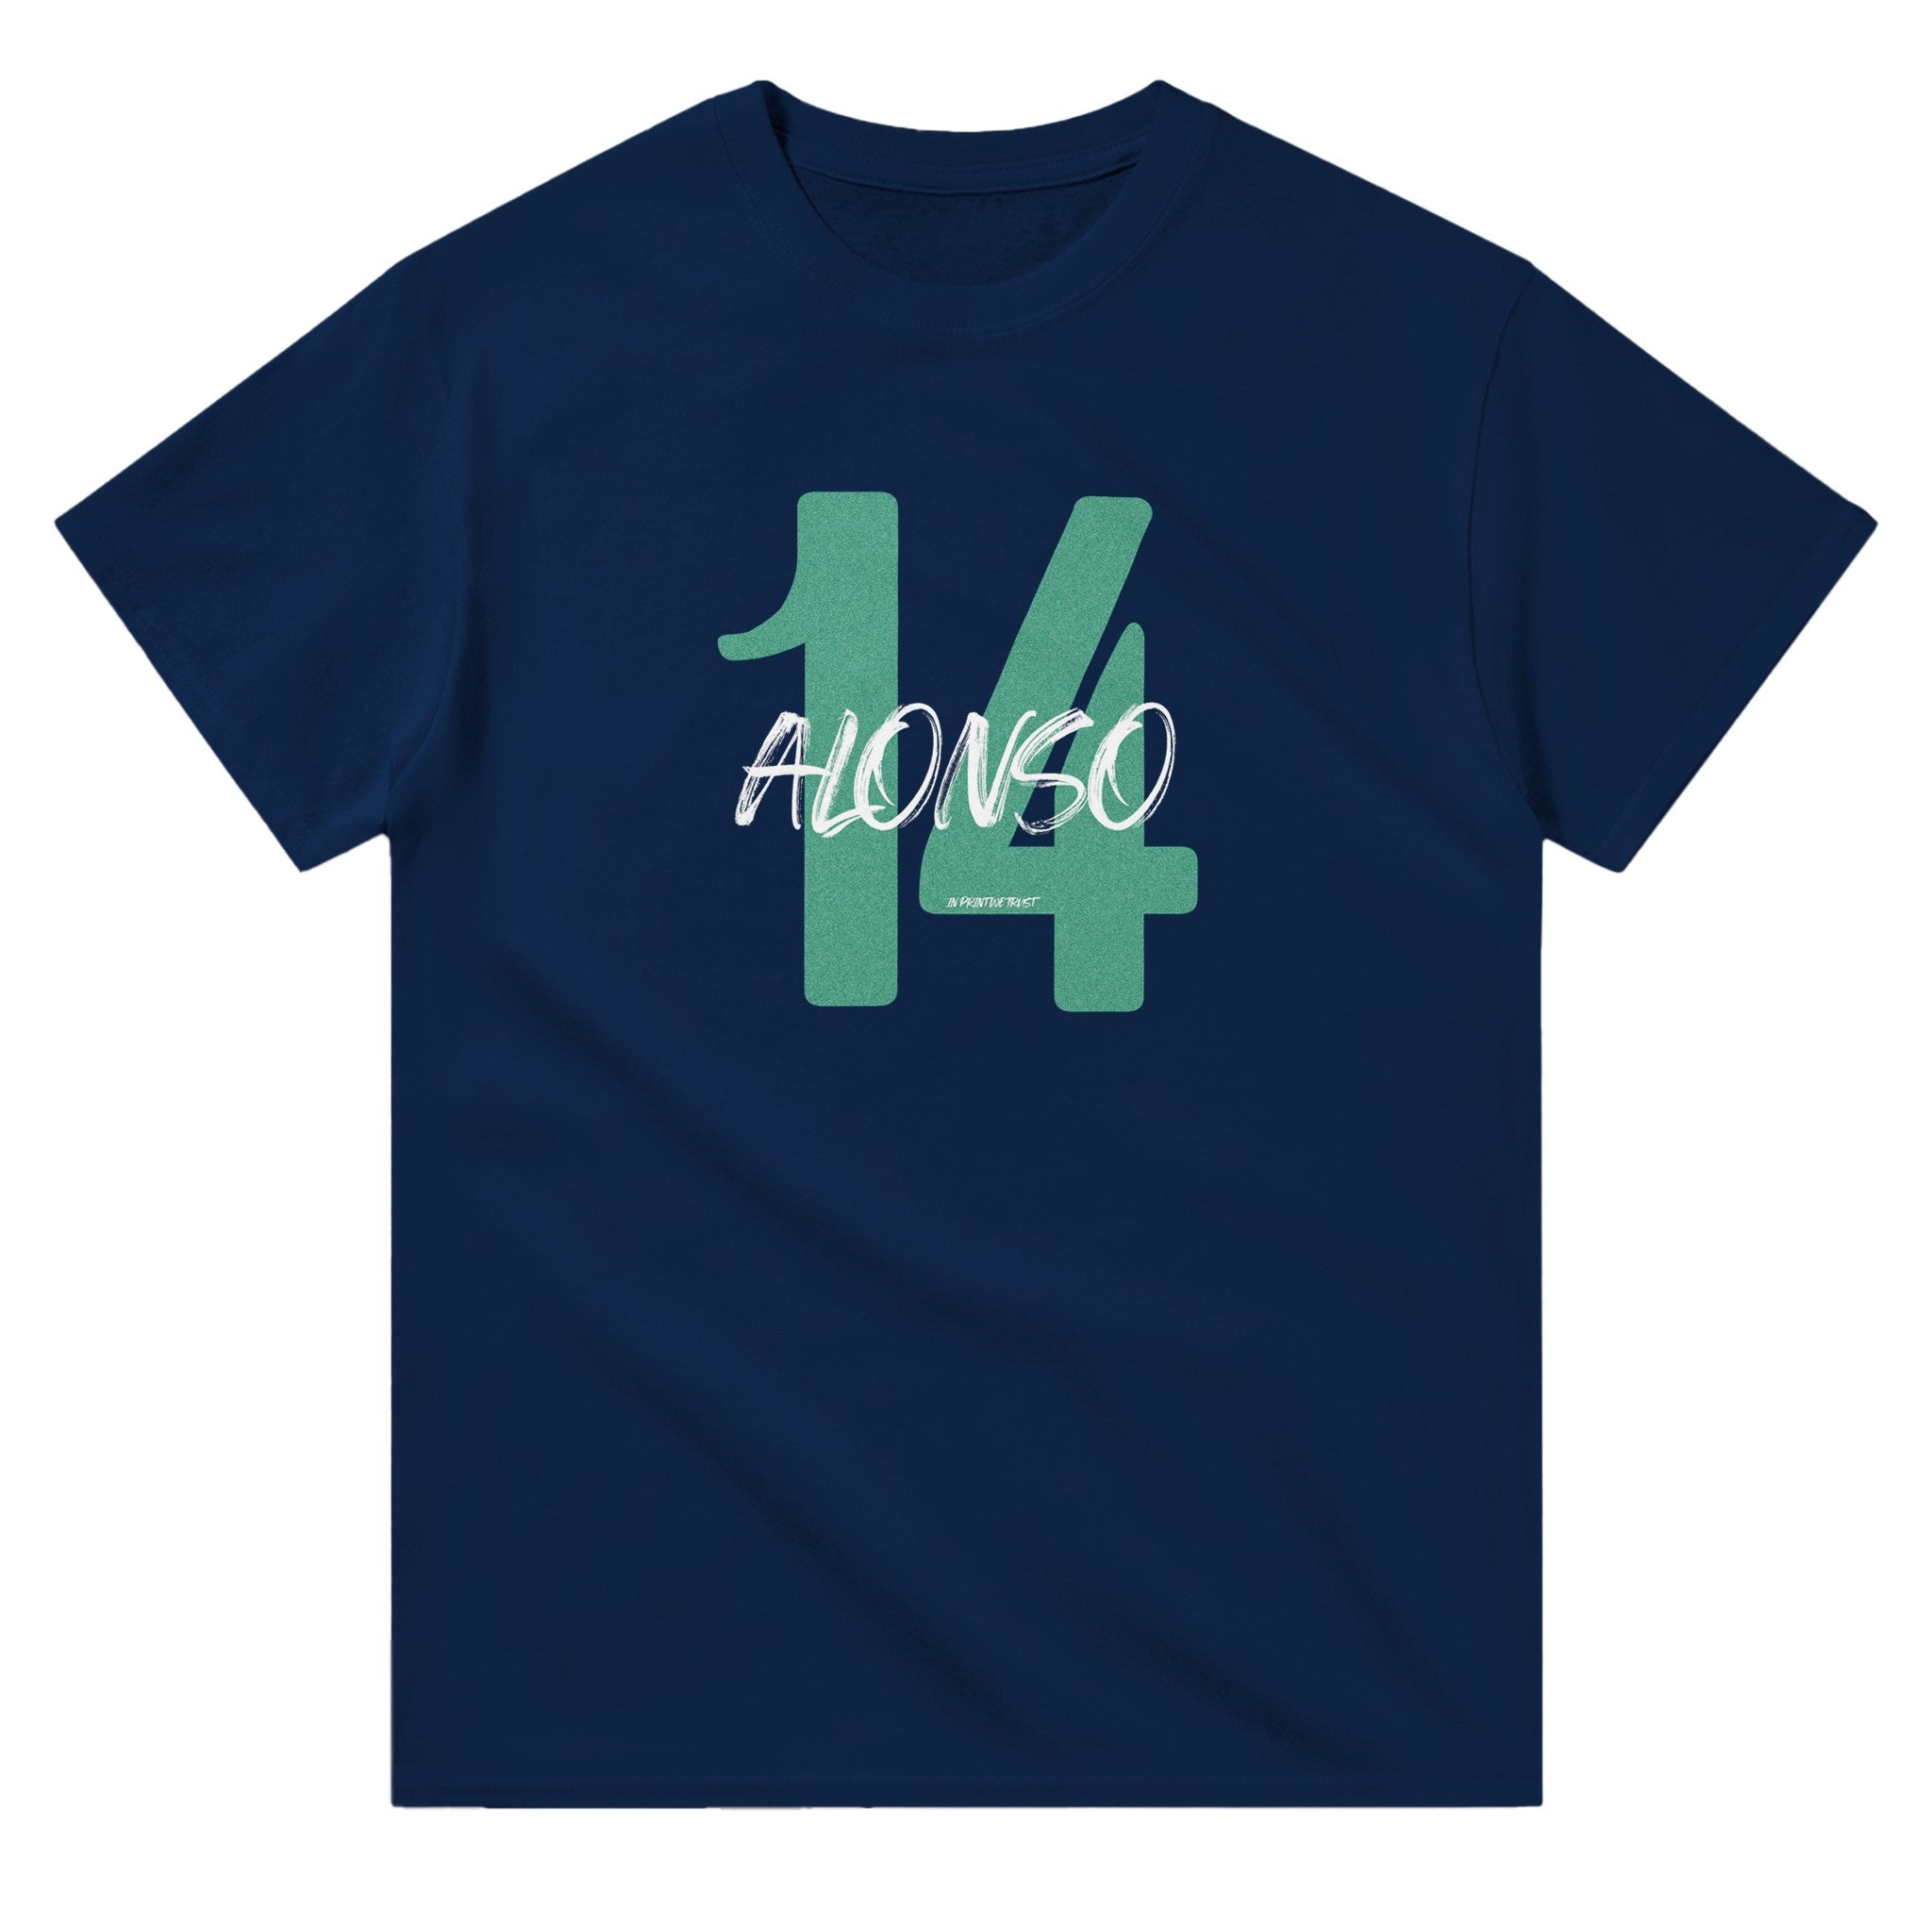 'Alonso 14' classic tee - In Print We Trust